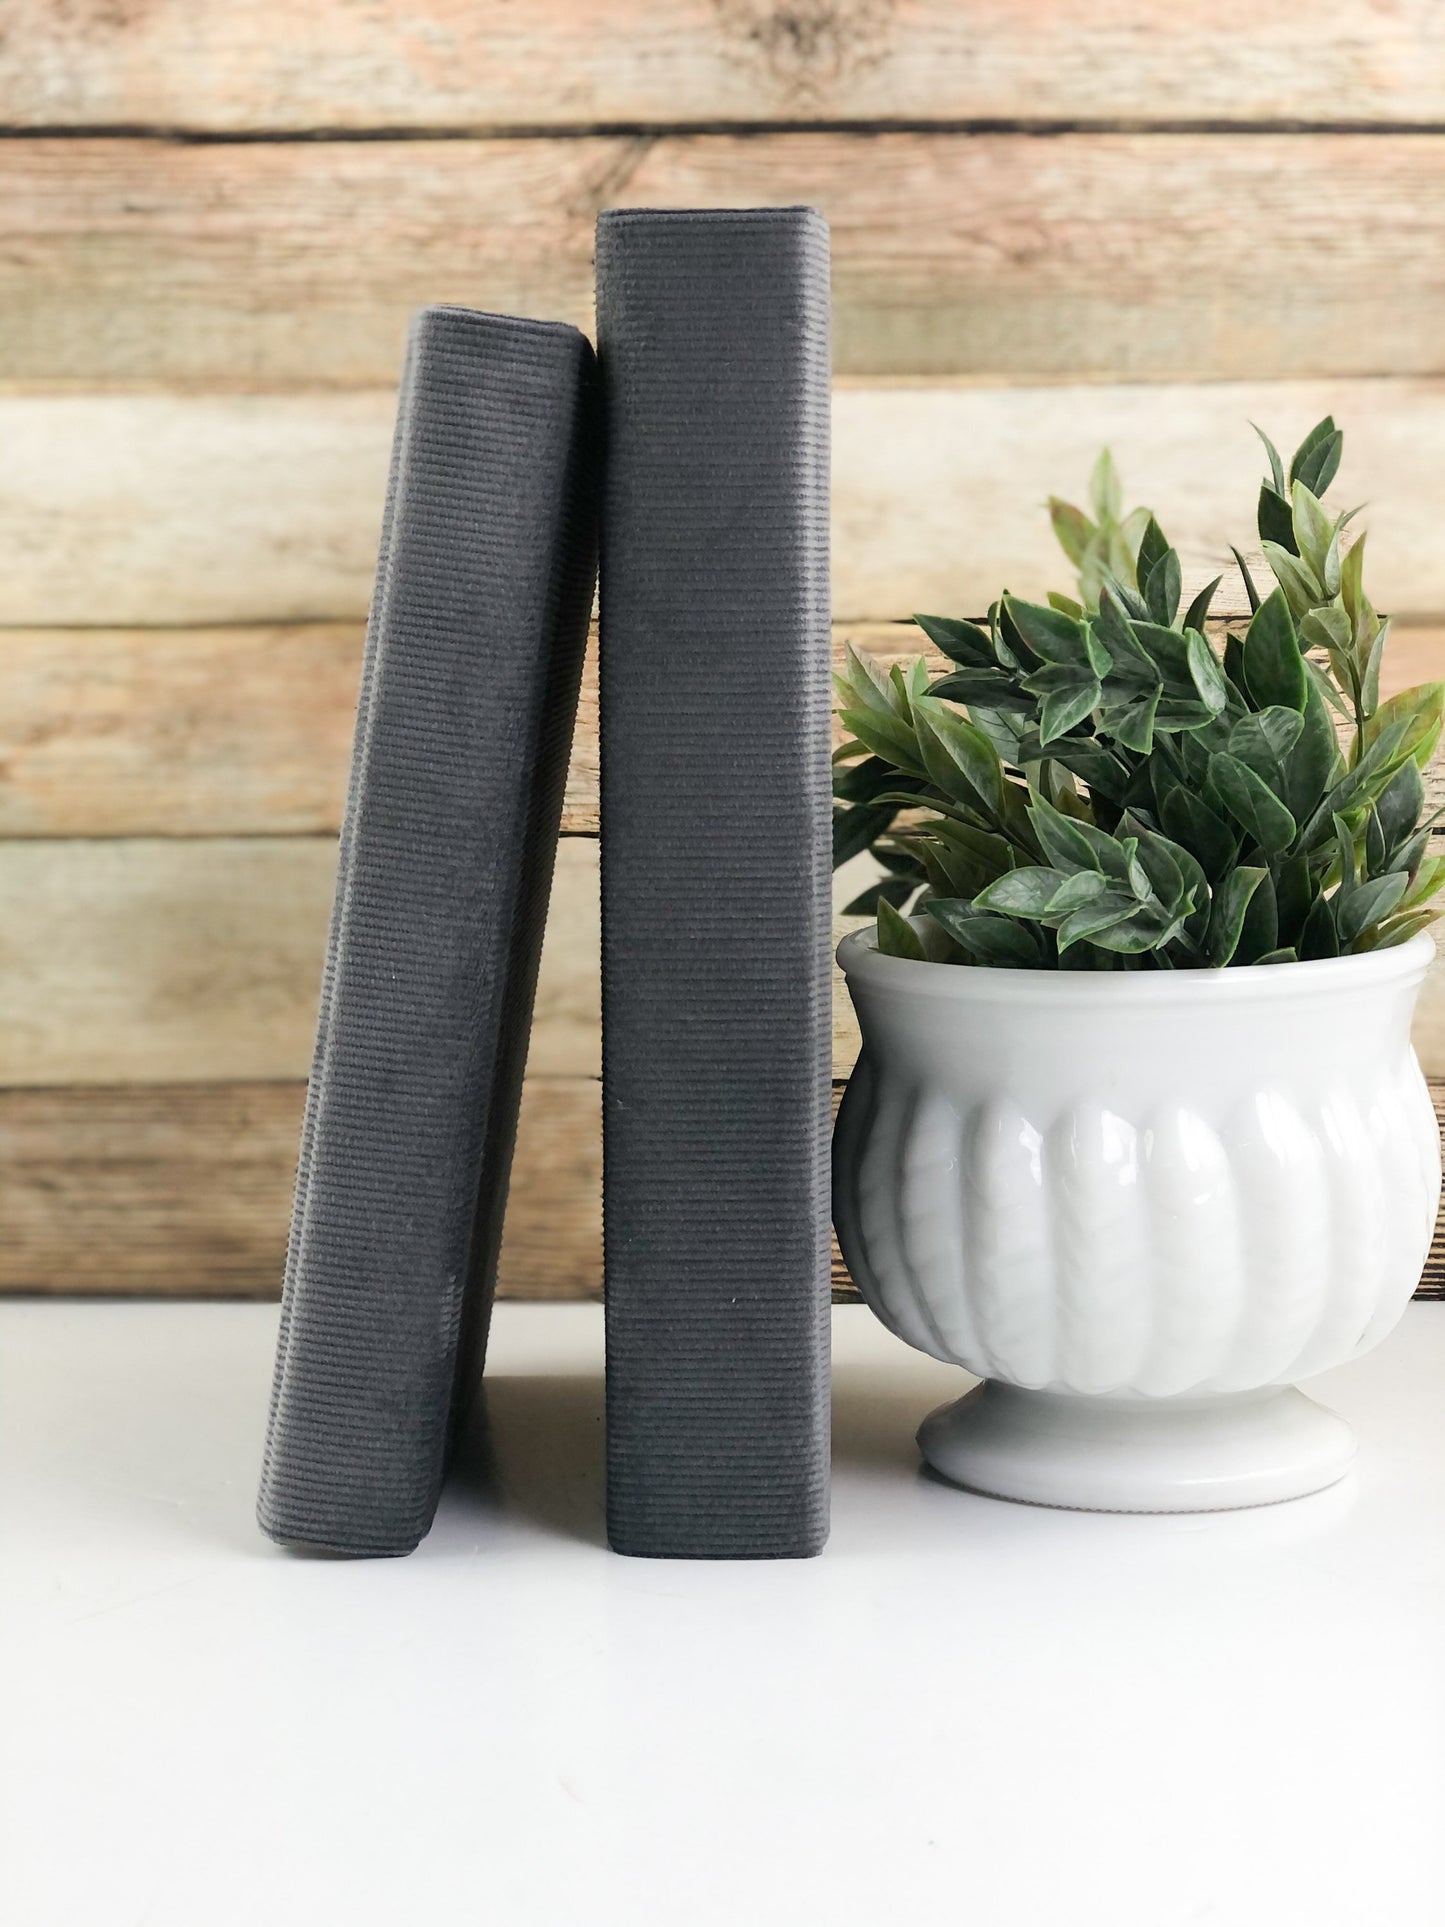 Gray Corduroy Covered Books